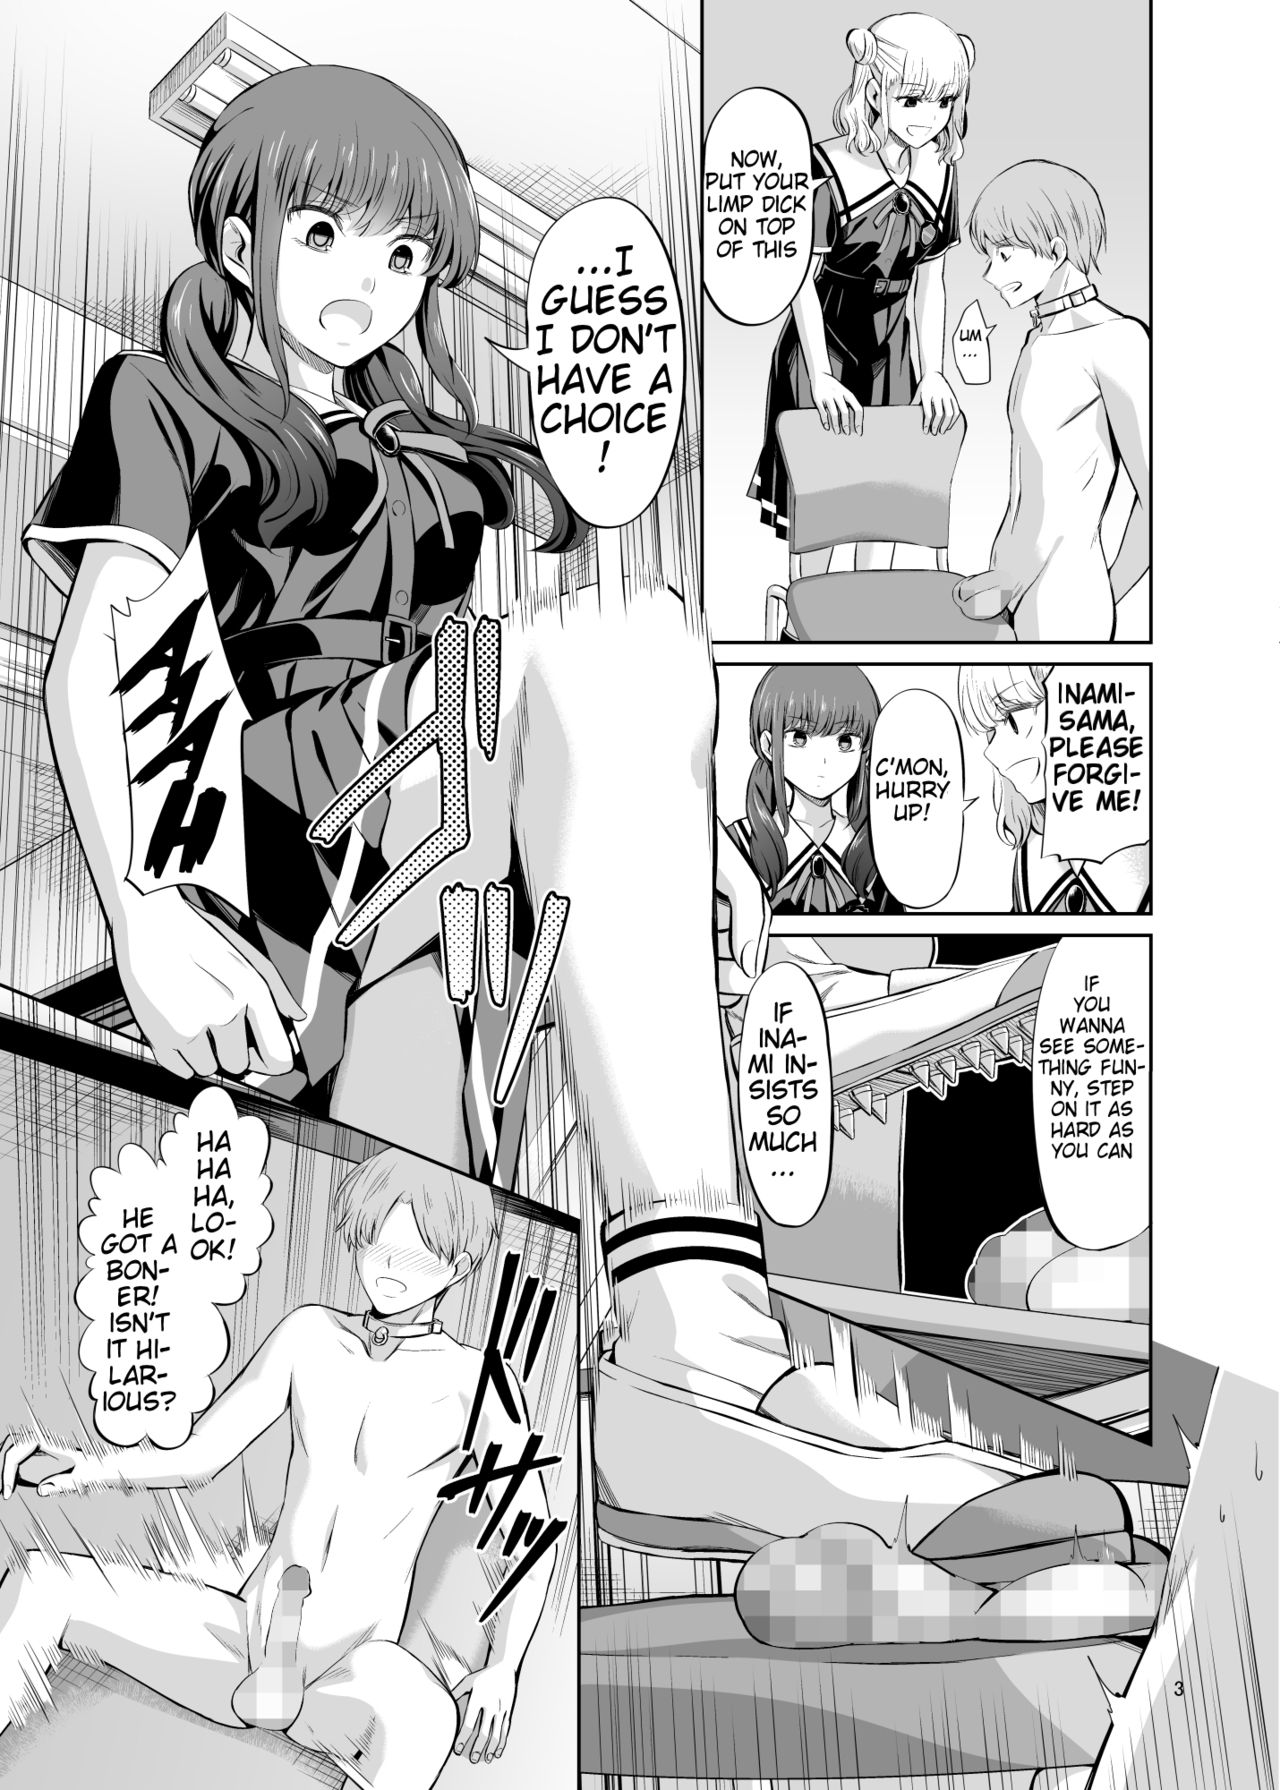 [Yamahata Rian] Tensuushugi no Kuni Kouhen | A Country Based on Point System Sequel [English] [Esoteric_Autist, klow82] page 5 full